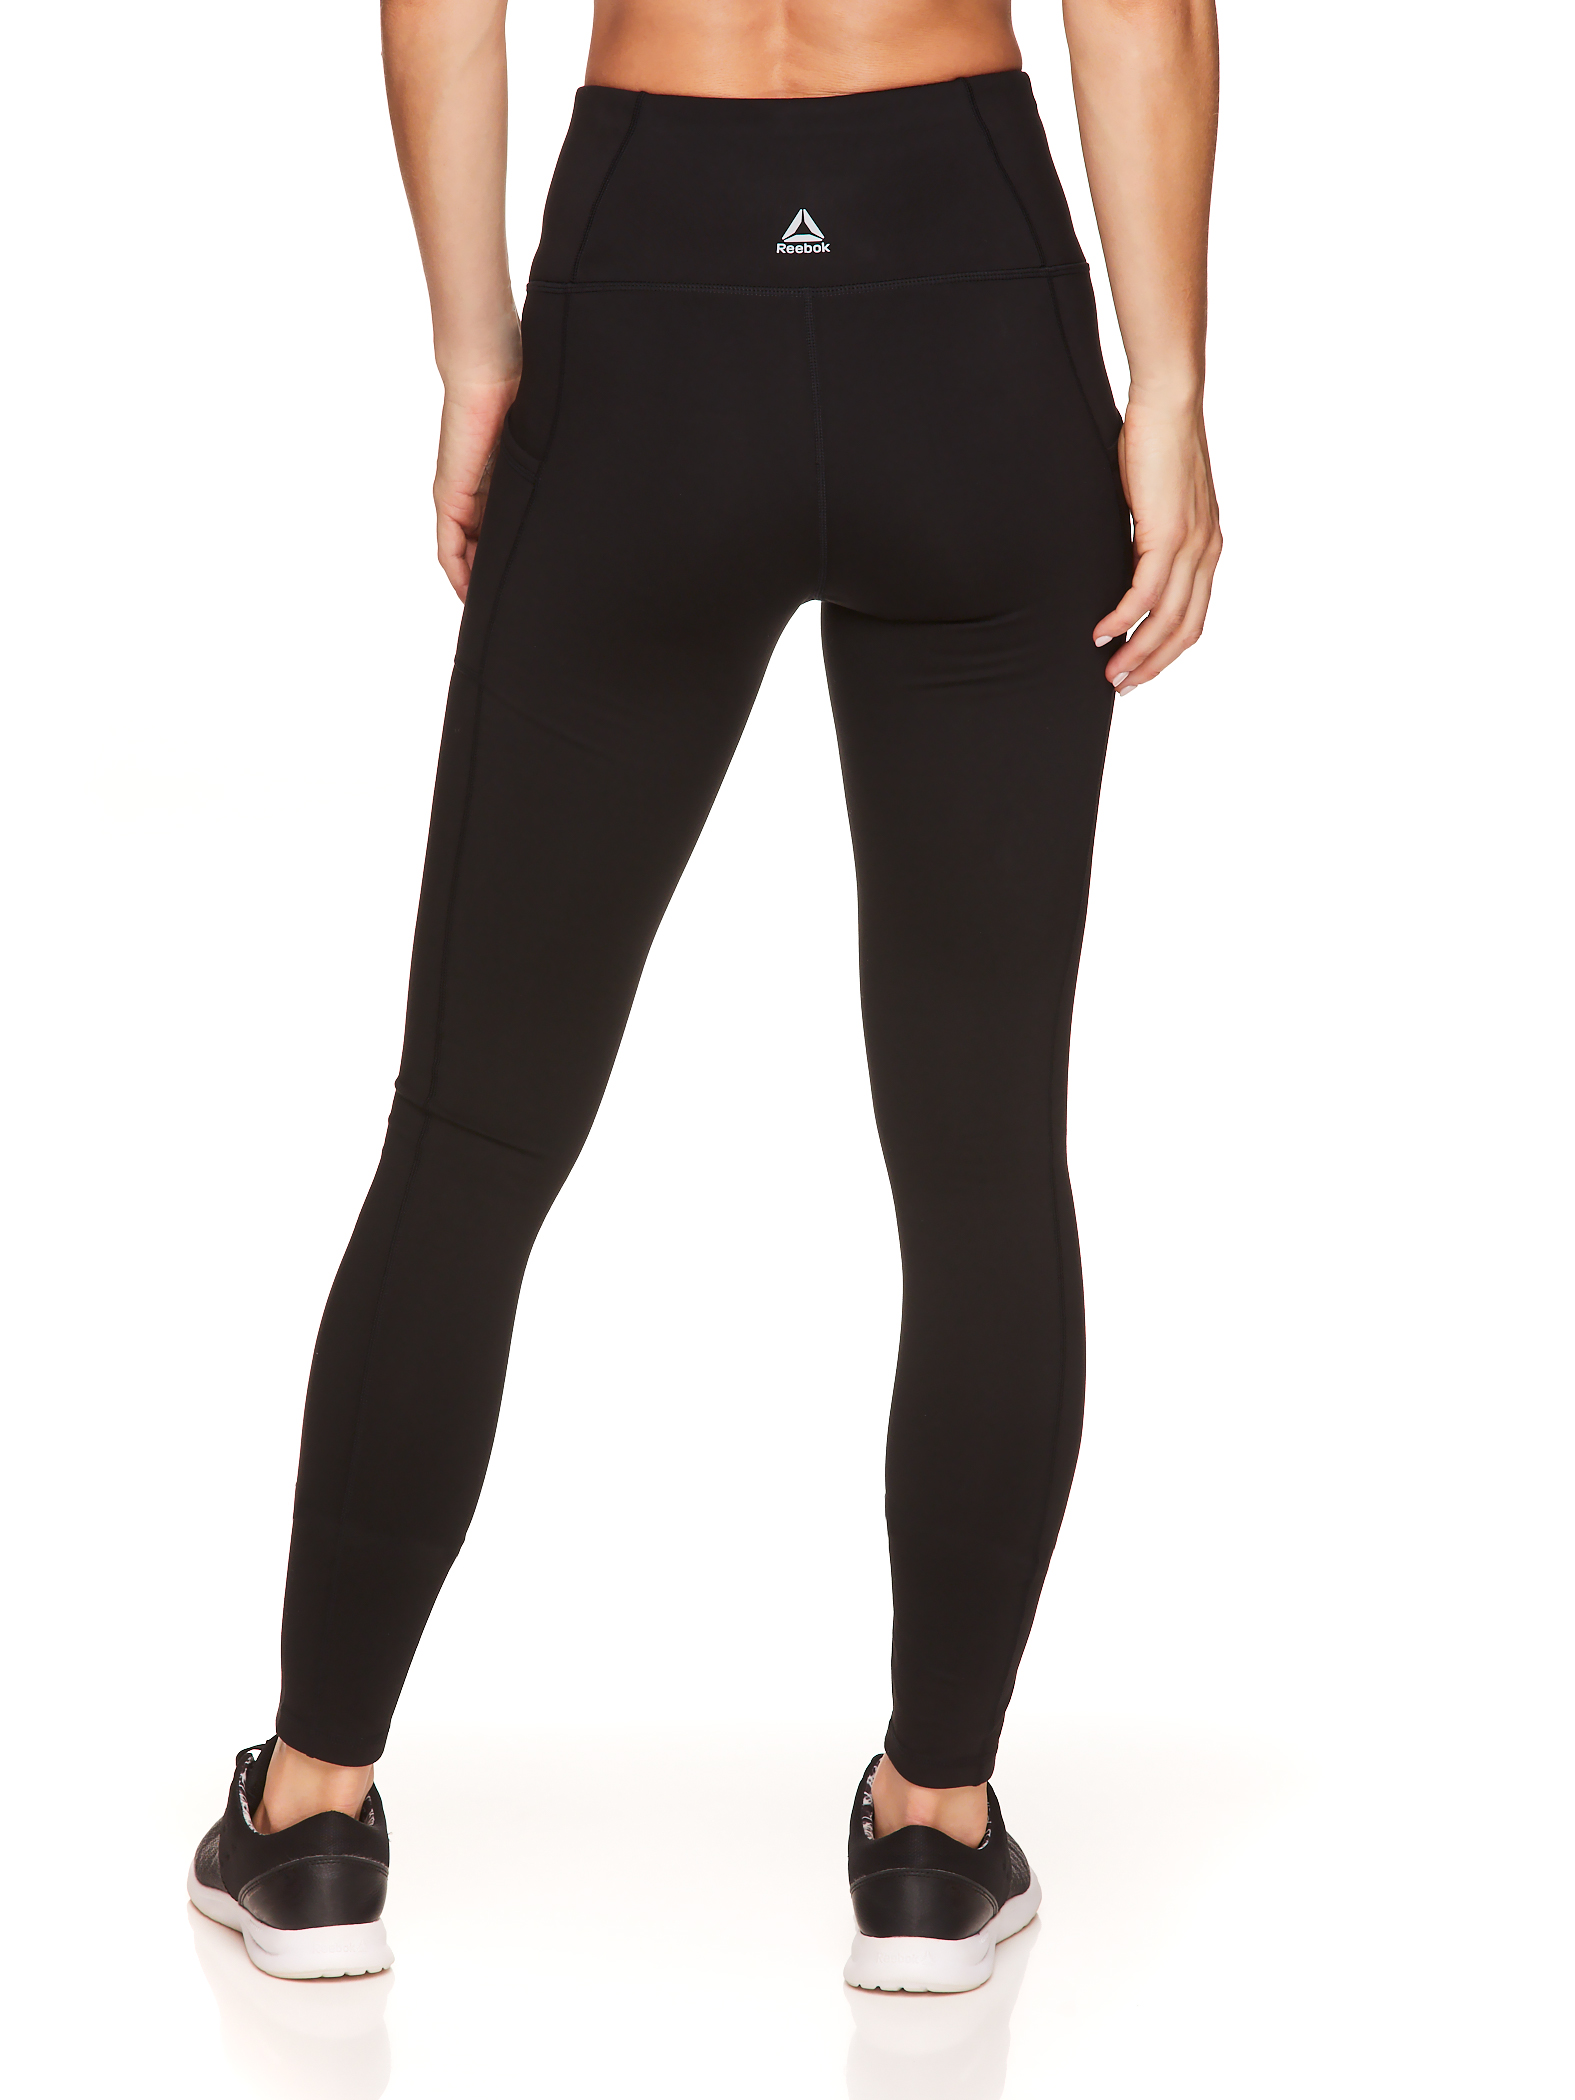 Reebok Women's Everyday High-Waisted Active Leggings with Pockets, 28" Inseam - image 3 of 4